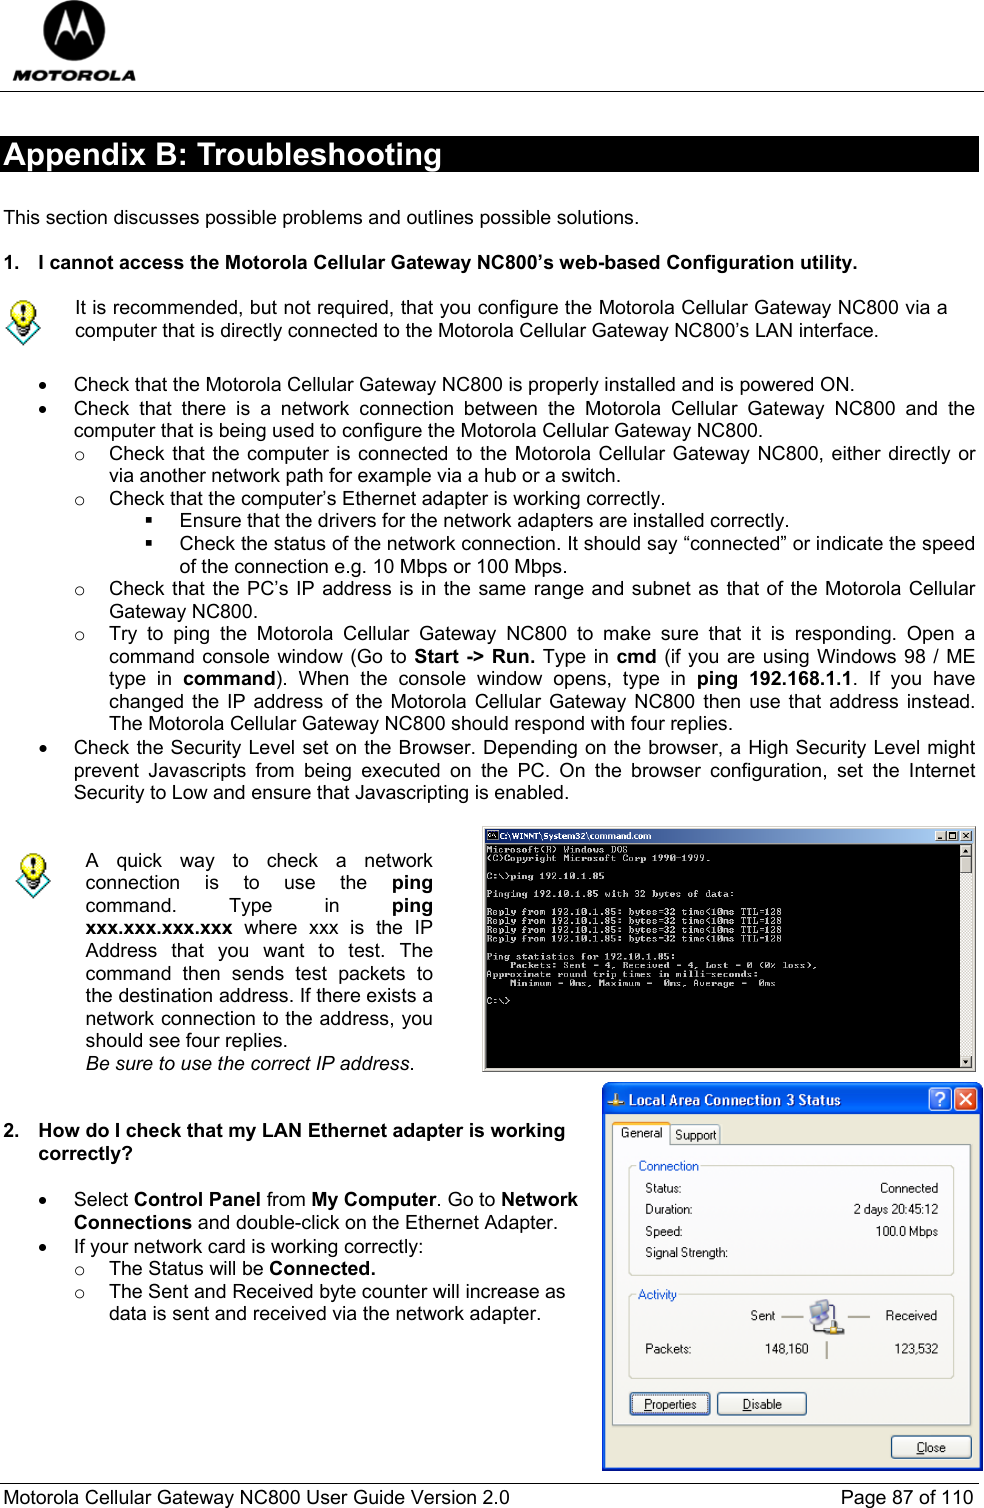  Motorola Cellular Gateway NC800 User Guide Version 2.0     Page 87 of 110  Appendix B: Troubleshooting  This section discusses possible problems and outlines possible solutions.   1.  I cannot access the Motorola Cellular Gateway NC800’s web-based Configuration utility.   It is recommended, but not required, that you configure the Motorola Cellular Gateway NC800 via a computer that is directly connected to the Motorola Cellular Gateway NC800’s LAN interface.  •  Check that the Motorola Cellular Gateway NC800 is properly installed and is powered ON. •  Check that there is a network connection between the Motorola Cellular Gateway NC800 and the computer that is being used to configure the Motorola Cellular Gateway NC800.  o  Check that the computer is connected to the Motorola Cellular Gateway NC800, either directly or via another network path for example via a hub or a switch.  o  Check that the computer’s Ethernet adapter is working correctly.   Ensure that the drivers for the network adapters are installed correctly.   Check the status of the network connection. It should say “connected” or indicate the speed of the connection e.g. 10 Mbps or 100 Mbps. o  Check that the PC’s IP address is in the same range and subnet as that of the Motorola Cellular Gateway NC800. o  Try to ping the Motorola Cellular Gateway NC800 to make sure that it is responding. Open a command console window (Go to Start -&gt; Run. Type in cmd (if you are using Windows 98 / ME type in command). When the console window opens, type in ping 192.168.1.1. If you have changed the IP address of the Motorola Cellular Gateway NC800 then use that address instead. The Motorola Cellular Gateway NC800 should respond with four replies. •  Check the Security Level set on the Browser. Depending on the browser, a High Security Level might prevent Javascripts from being executed on the PC. On the browser configuration, set the Internet Security to Low and ensure that Javascripting is enabled.    A quick way to check a network connection is to use the ping command. Type in ping xxx.xxx.xxx.xxx  where xxx is the IP Address that you want to test. The command then sends test packets to the destination address. If there exists a network connection to the address, you should see four replies. Be sure to use the correct IP address.    2.  How do I check that my LAN Ethernet adapter is working correctly?  • Select Control Panel from My Computer. Go to Network Connections and double-click on the Ethernet Adapter. •  If your network card is working correctly: o  The Status will be Connected. o  The Sent and Received byte counter will increase as data is sent and received via the network adapter.       